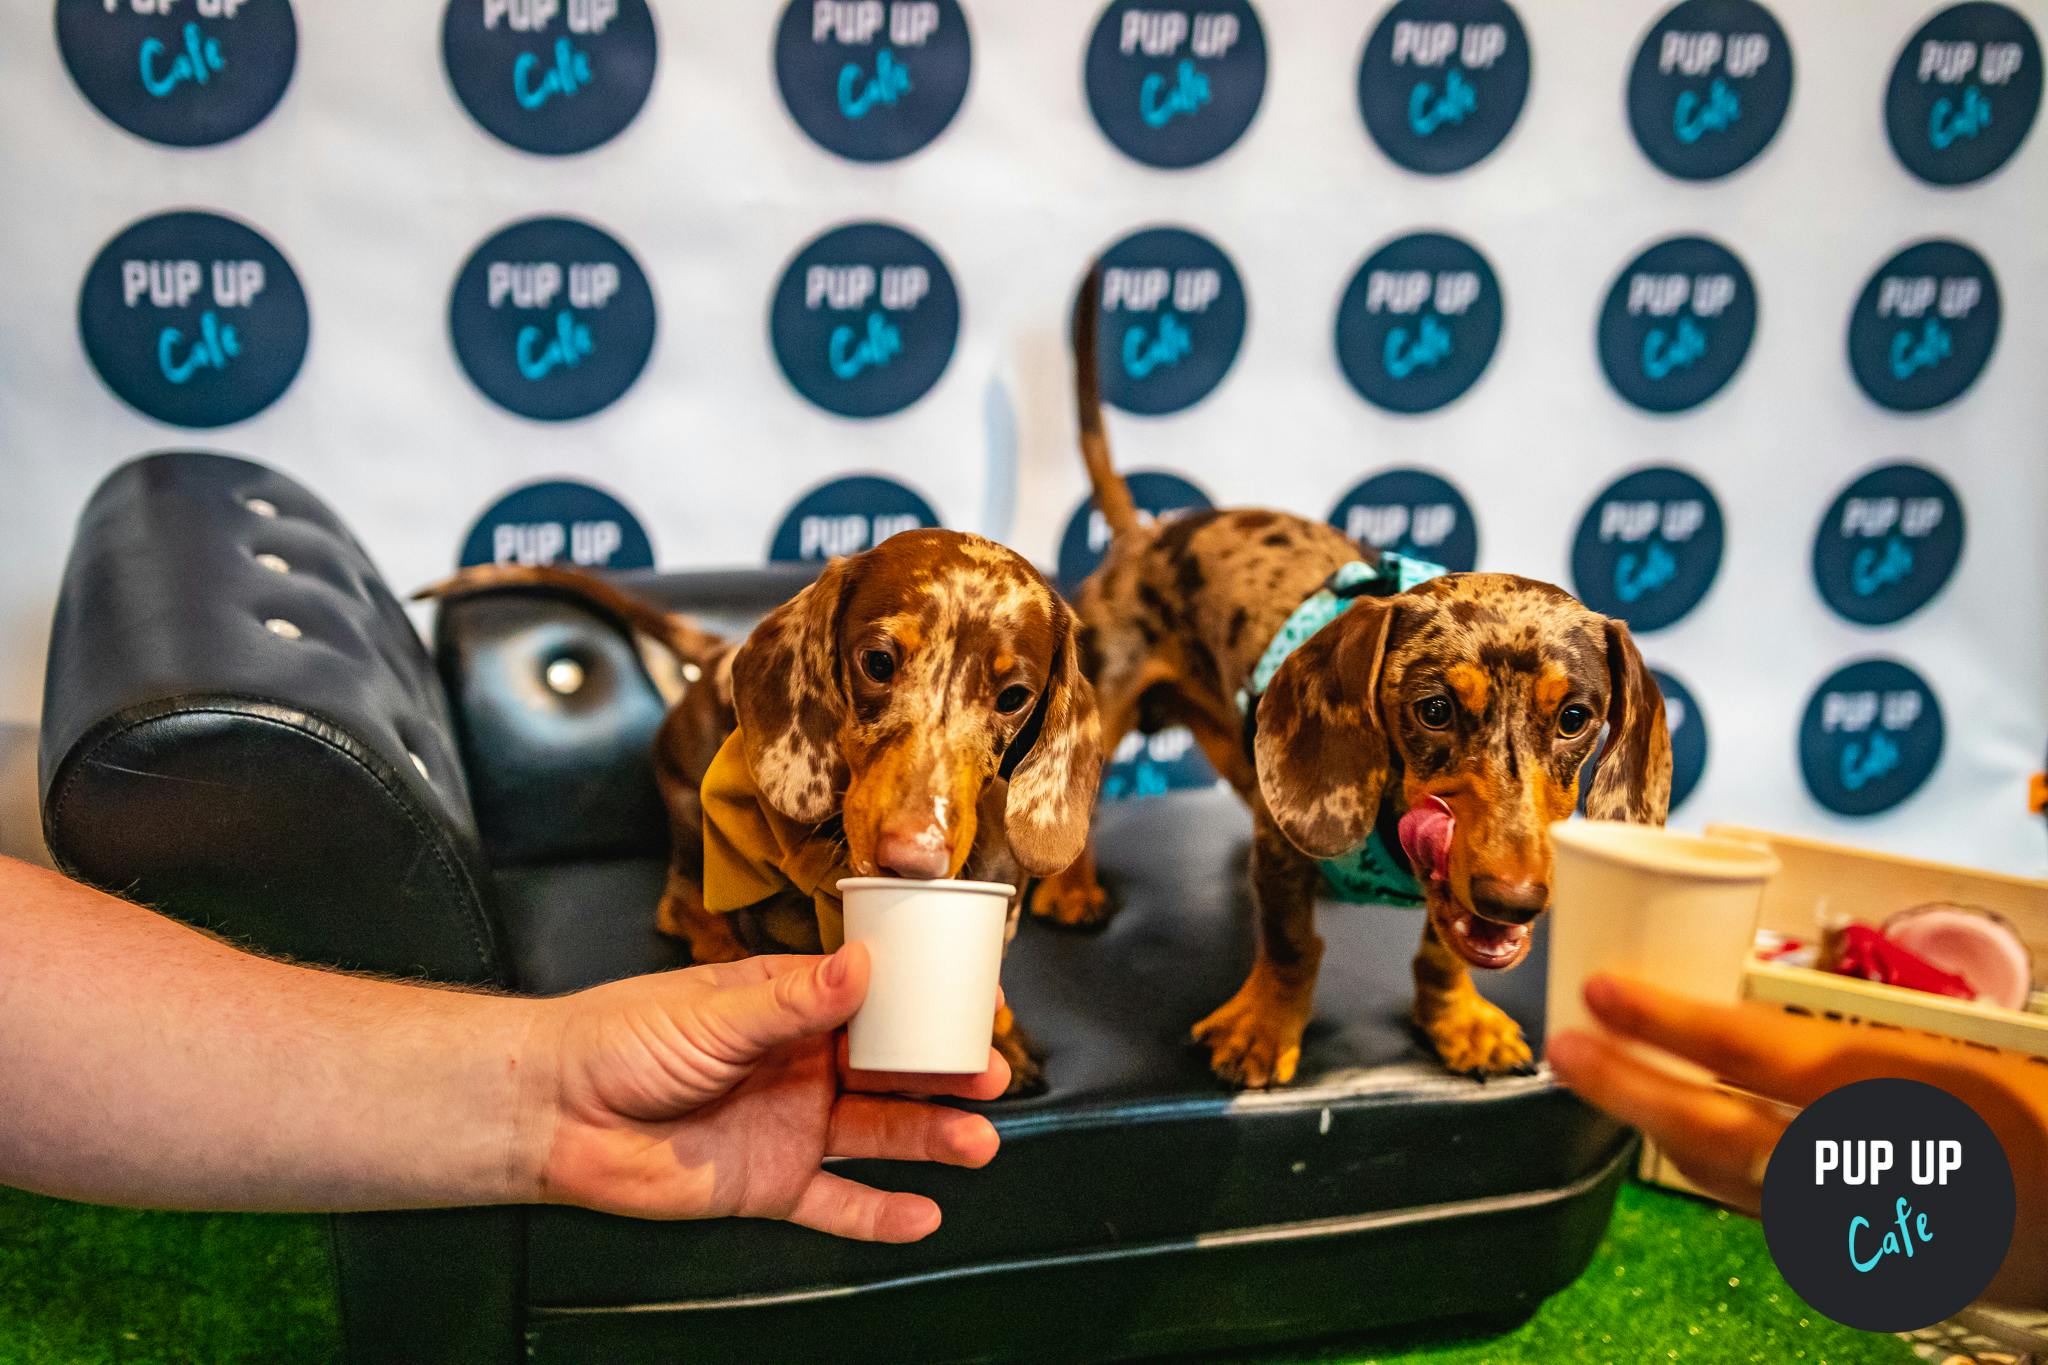 Glasgow bar to host ‘pup-up’ cafe for Dachshunds